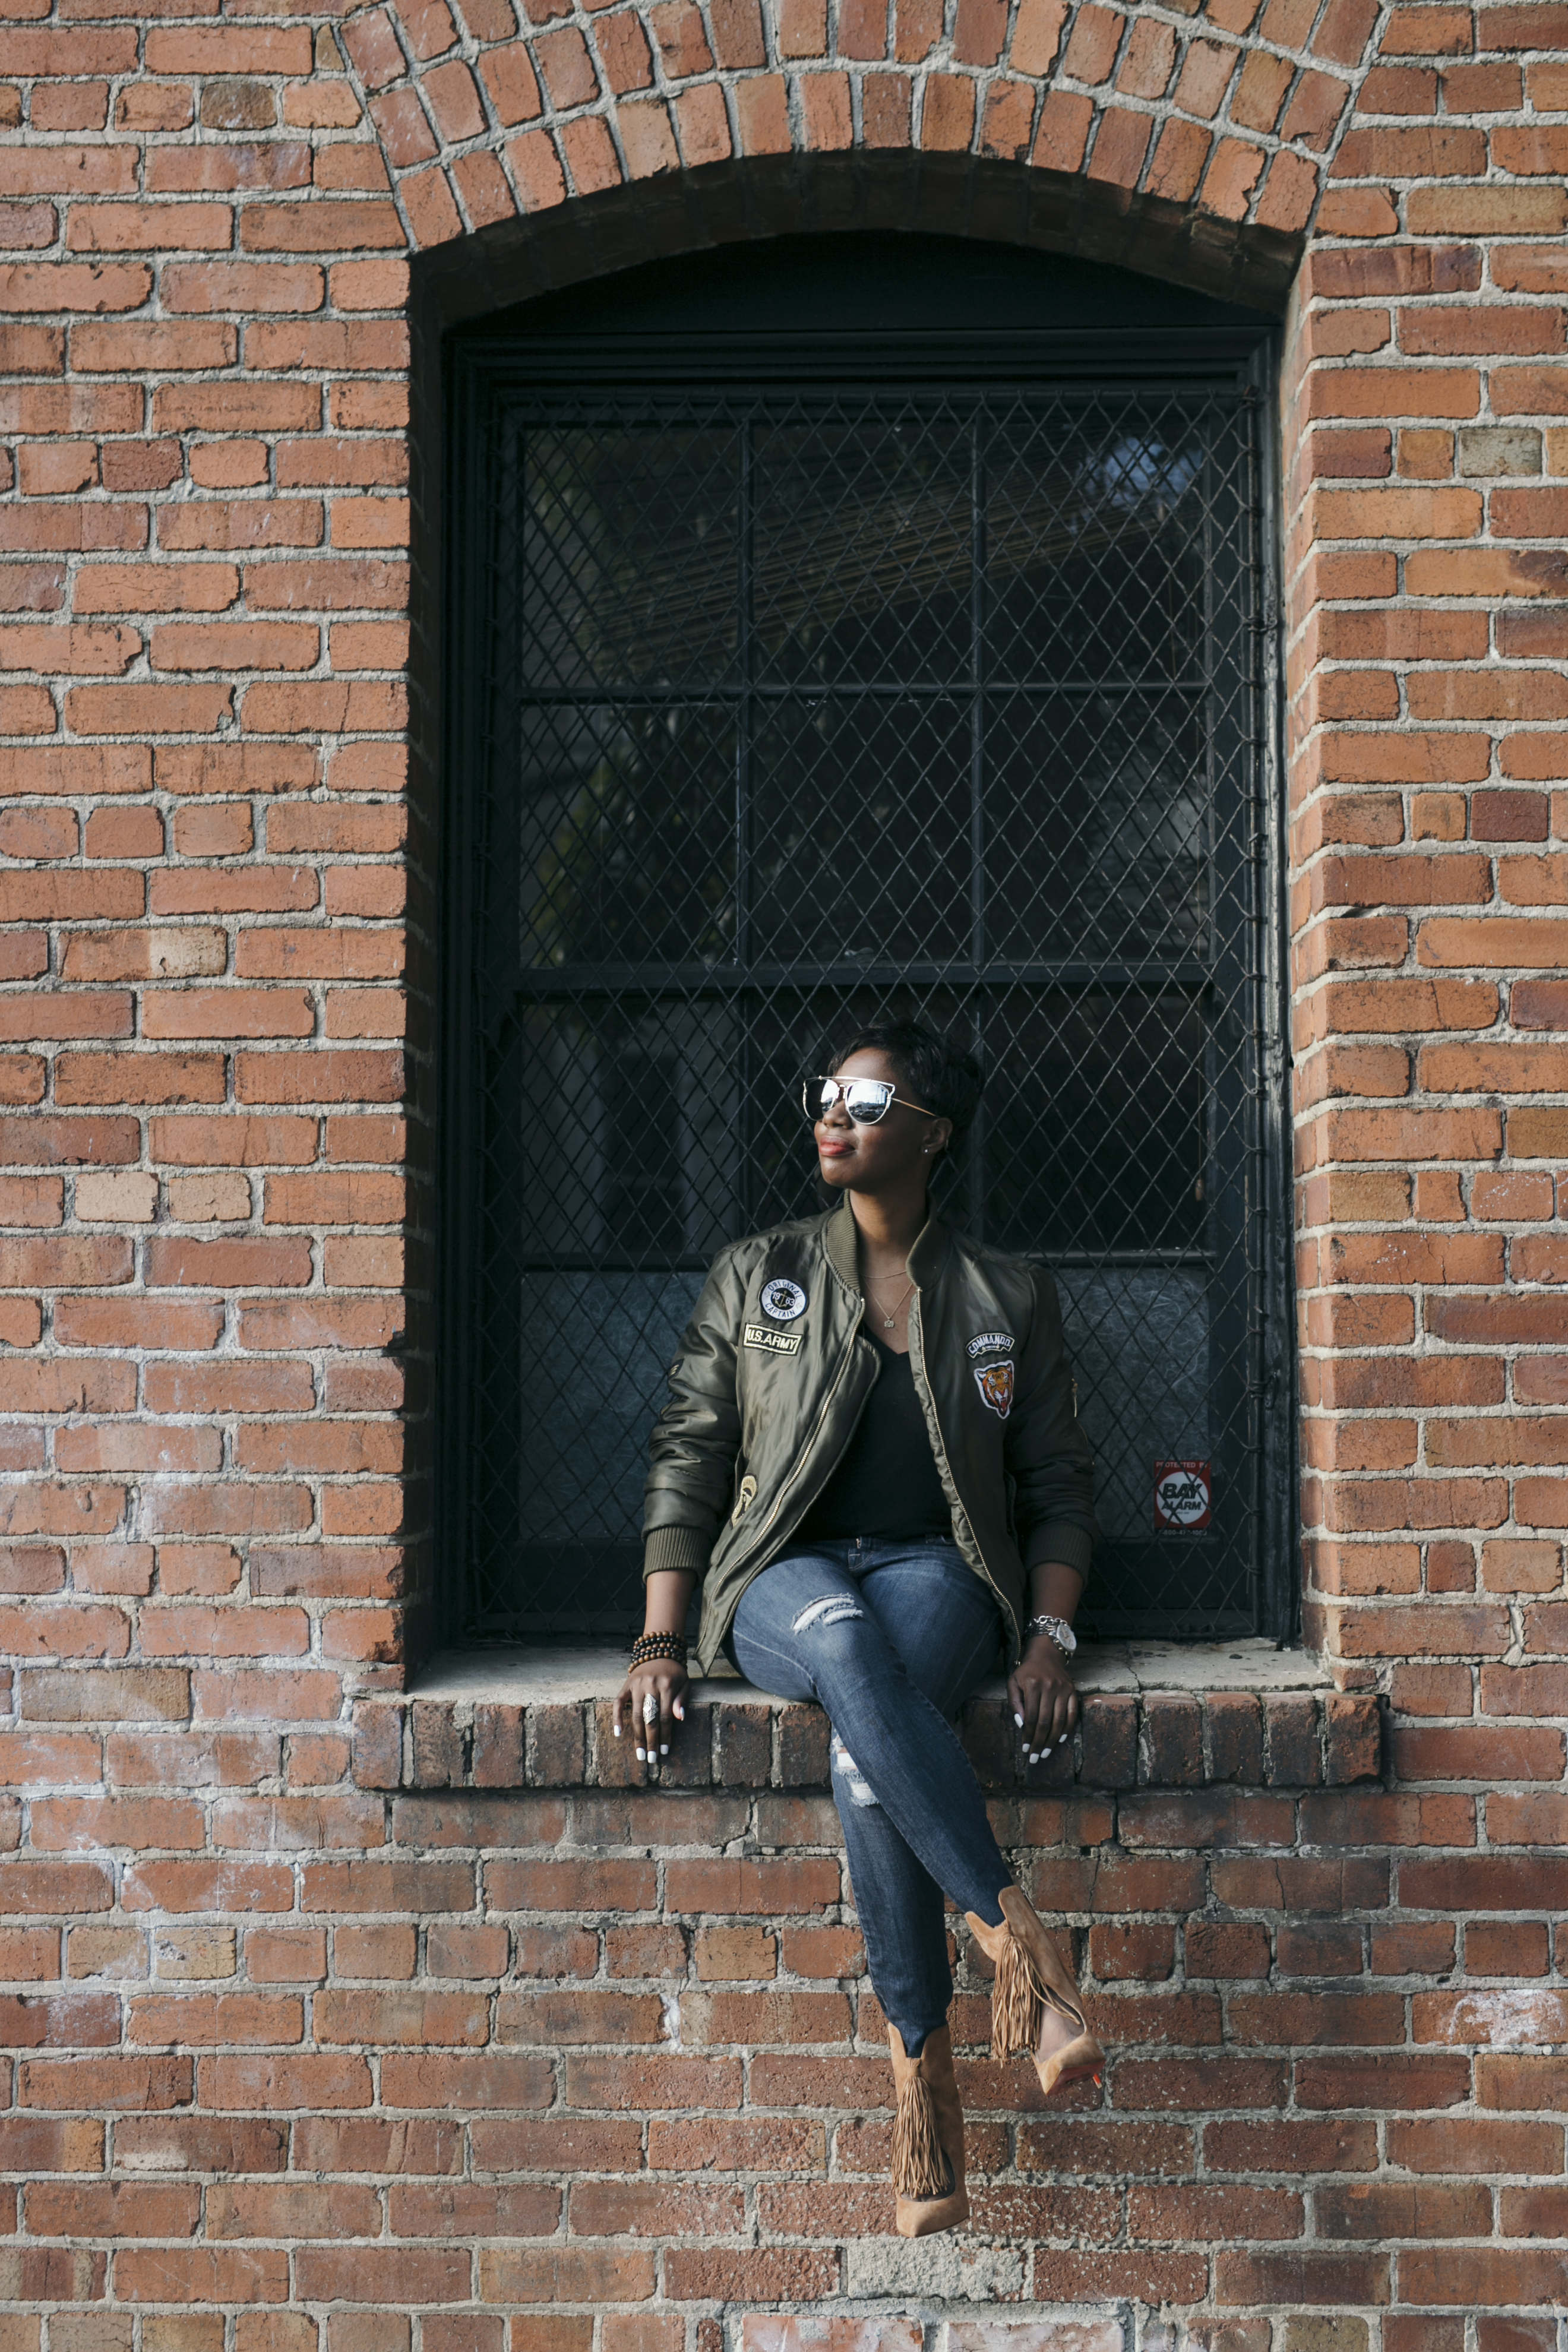 Mirrored Sunglasses Wingman Bomber Jacket Black Tshirt Ripped Jeans Louboutin Boots San Francisco Style Blogger